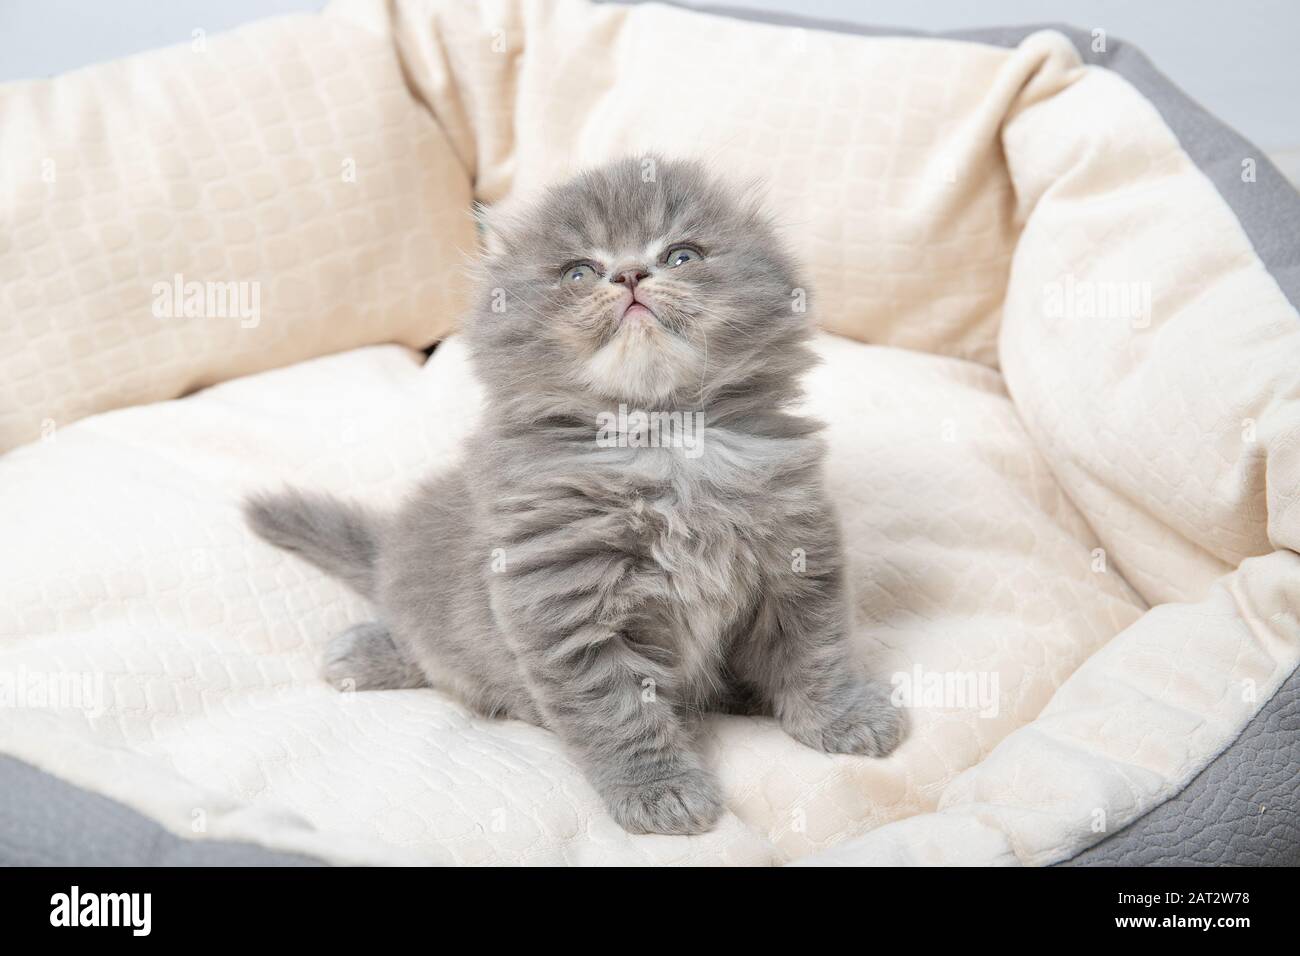 The kitten lies in a bed for cats Stock Photo